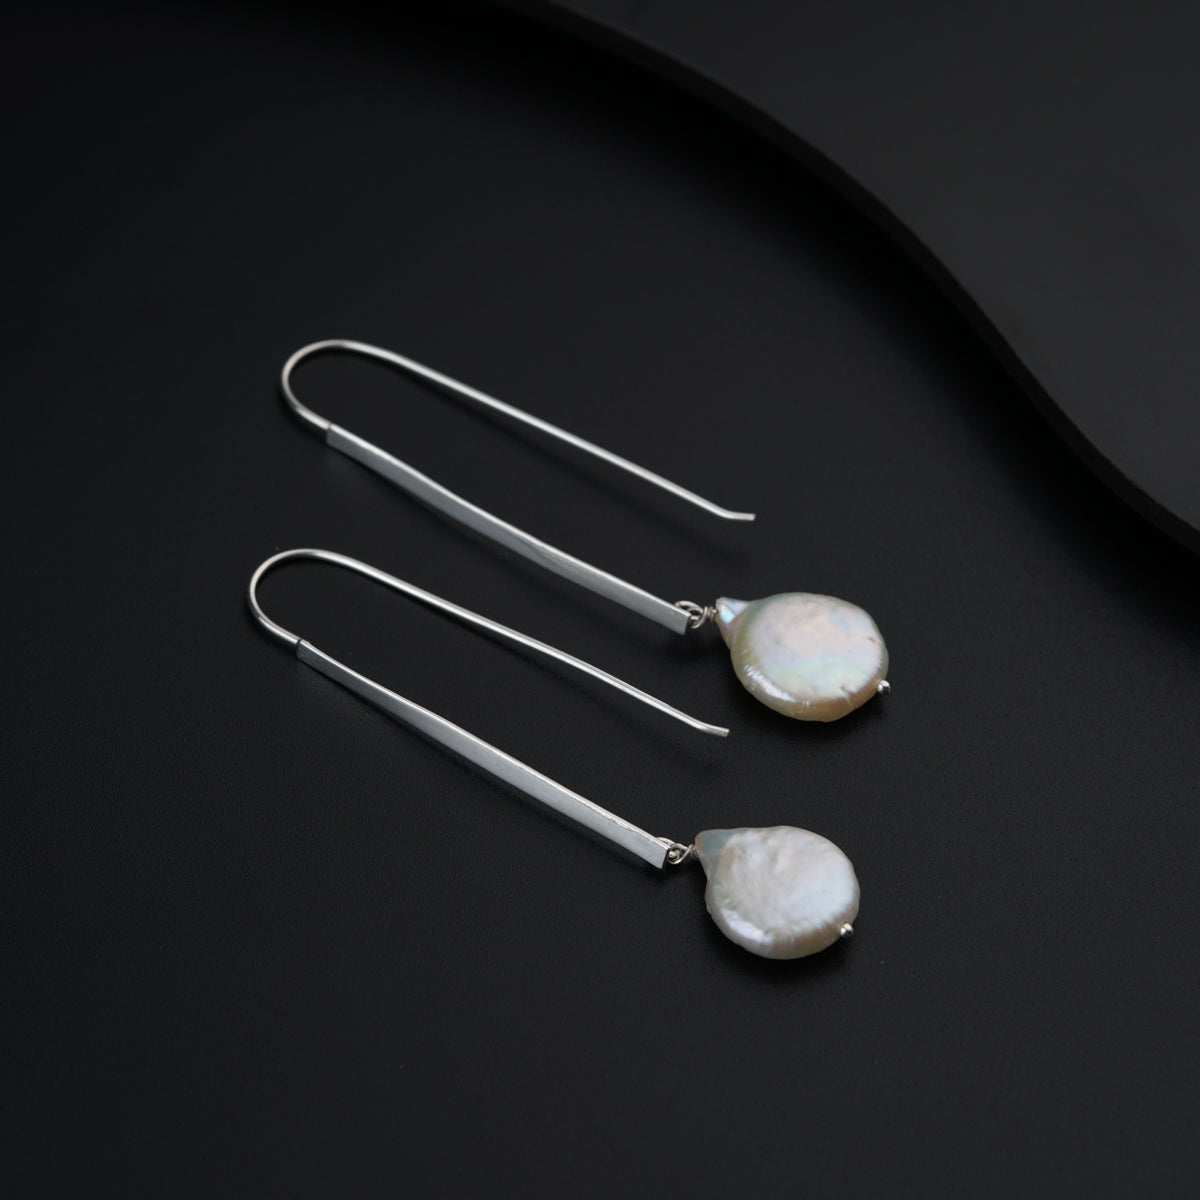 a pair of earrings with white pearls on a black surface